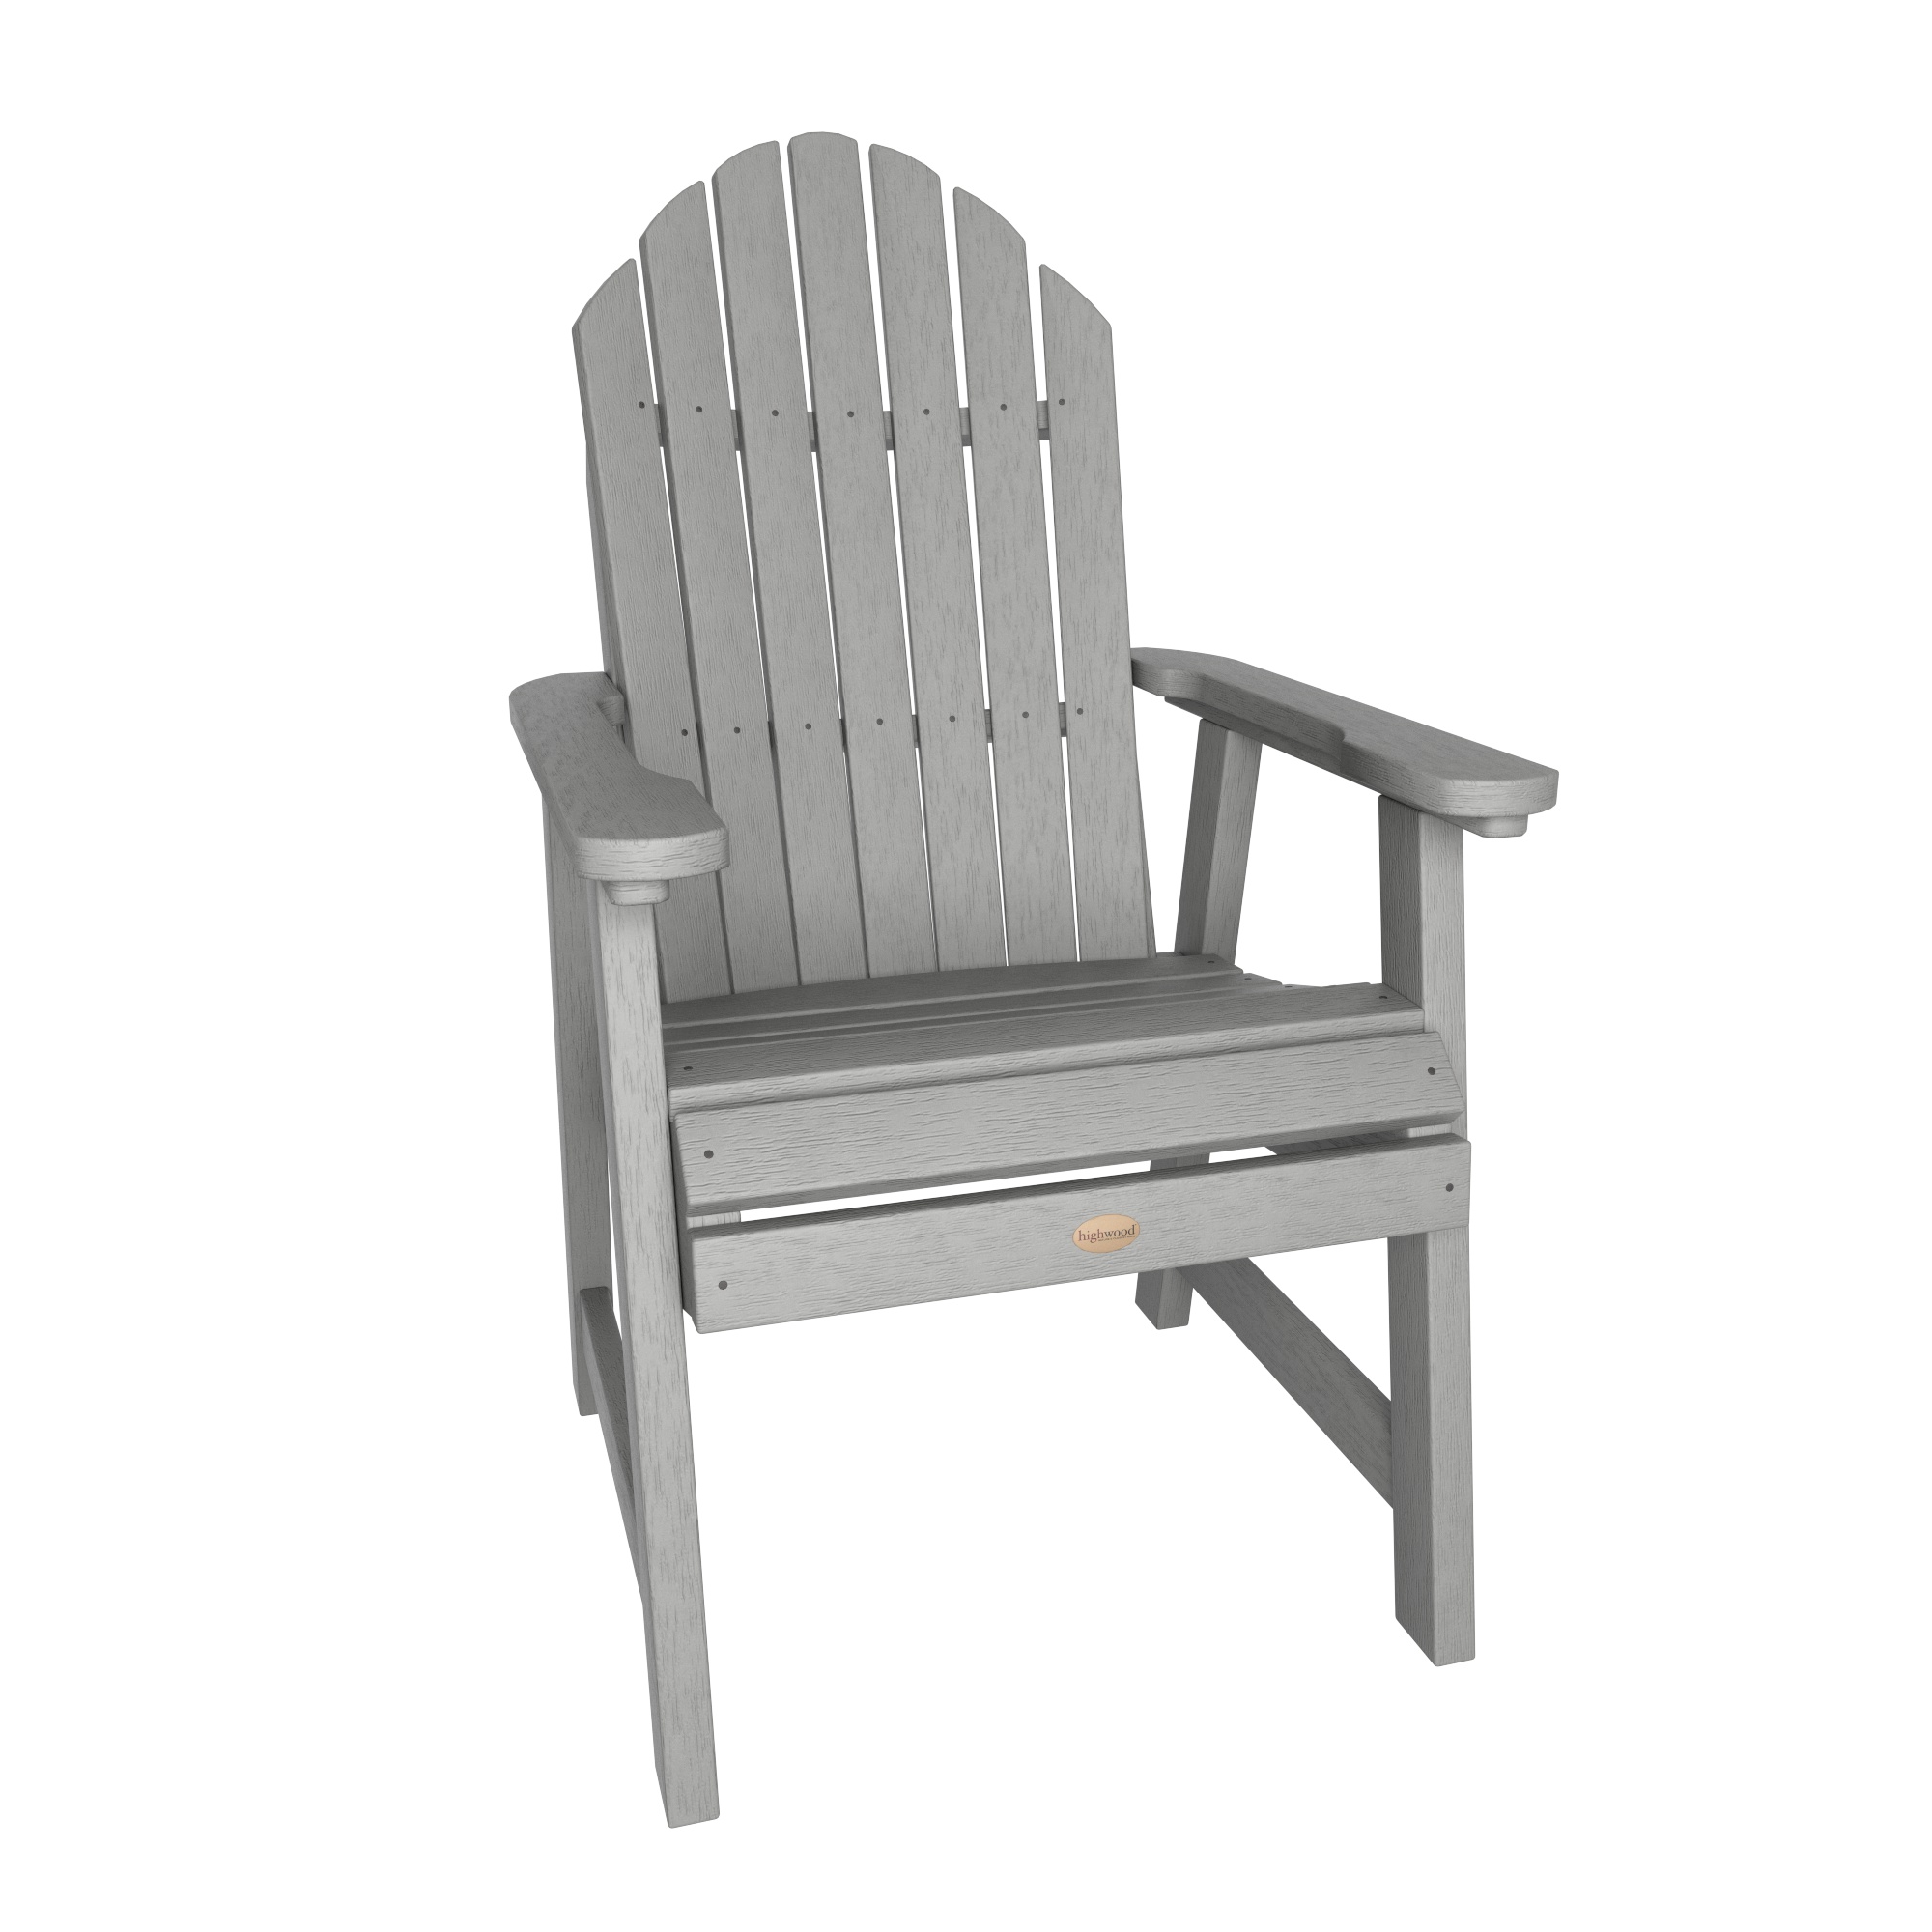 Highwood Hamilton Deck Chair - Dining Height - image 1 of 2